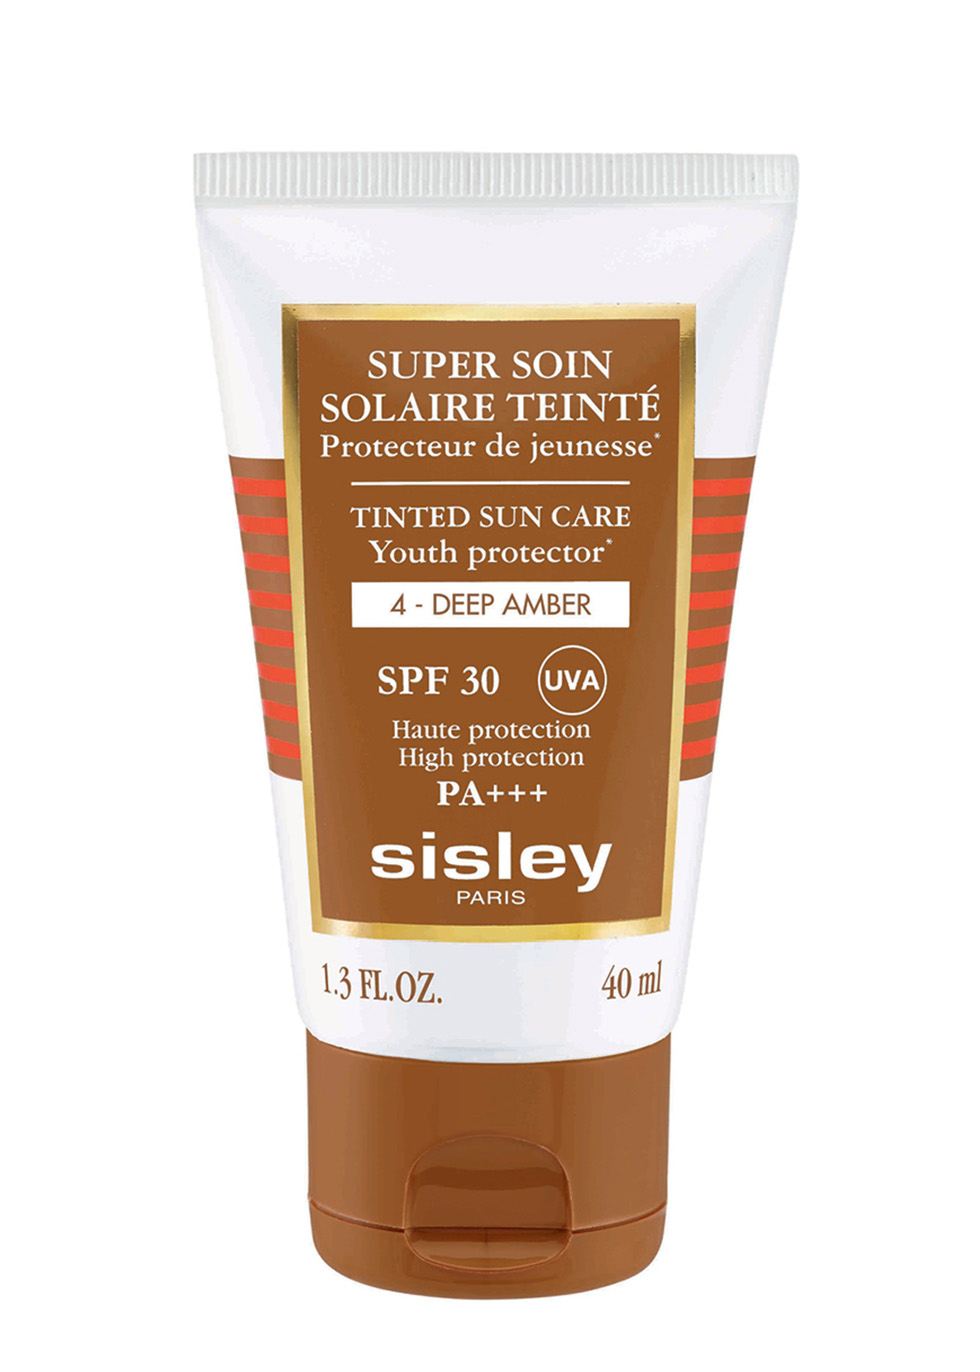 Super Soin Solaire Tinted Sun Care SPF30 40ml